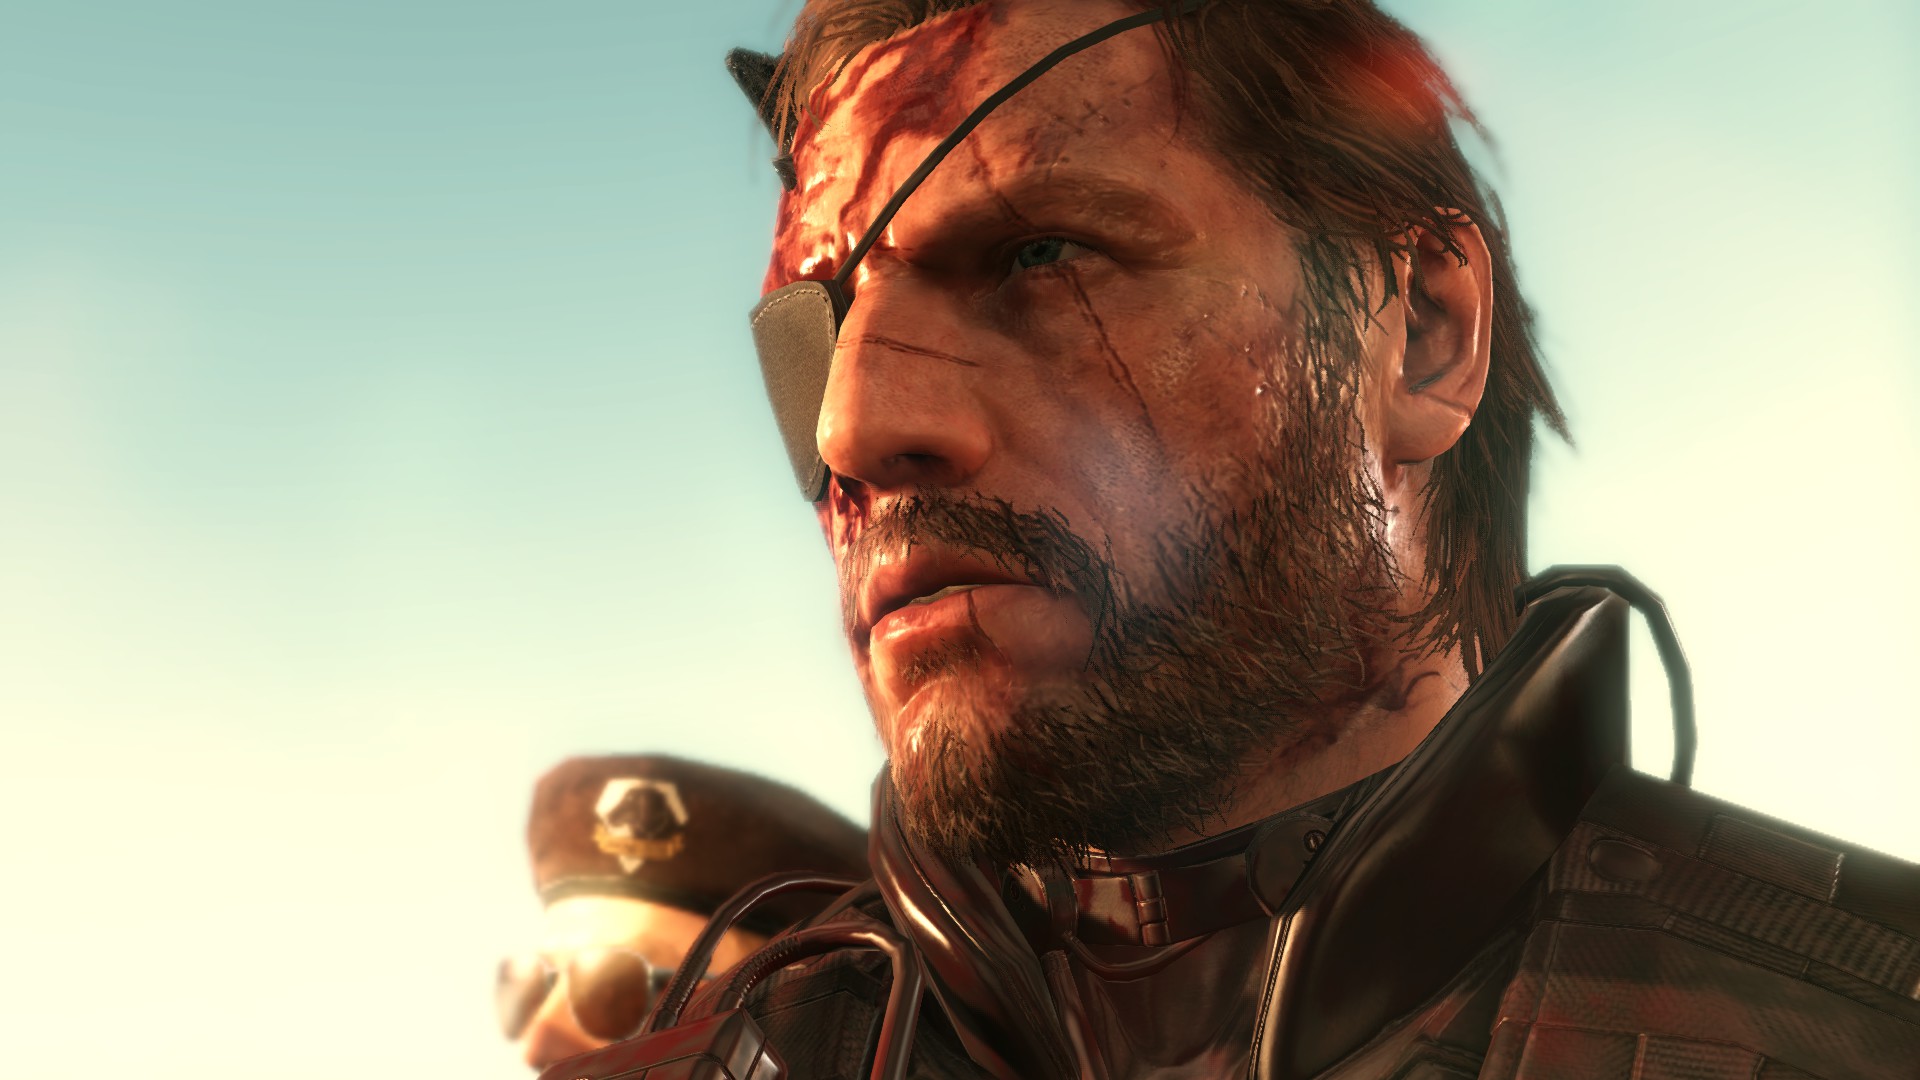 30+ Big Boss (Metal Gear Solid) HD Wallpapers and Backgrounds